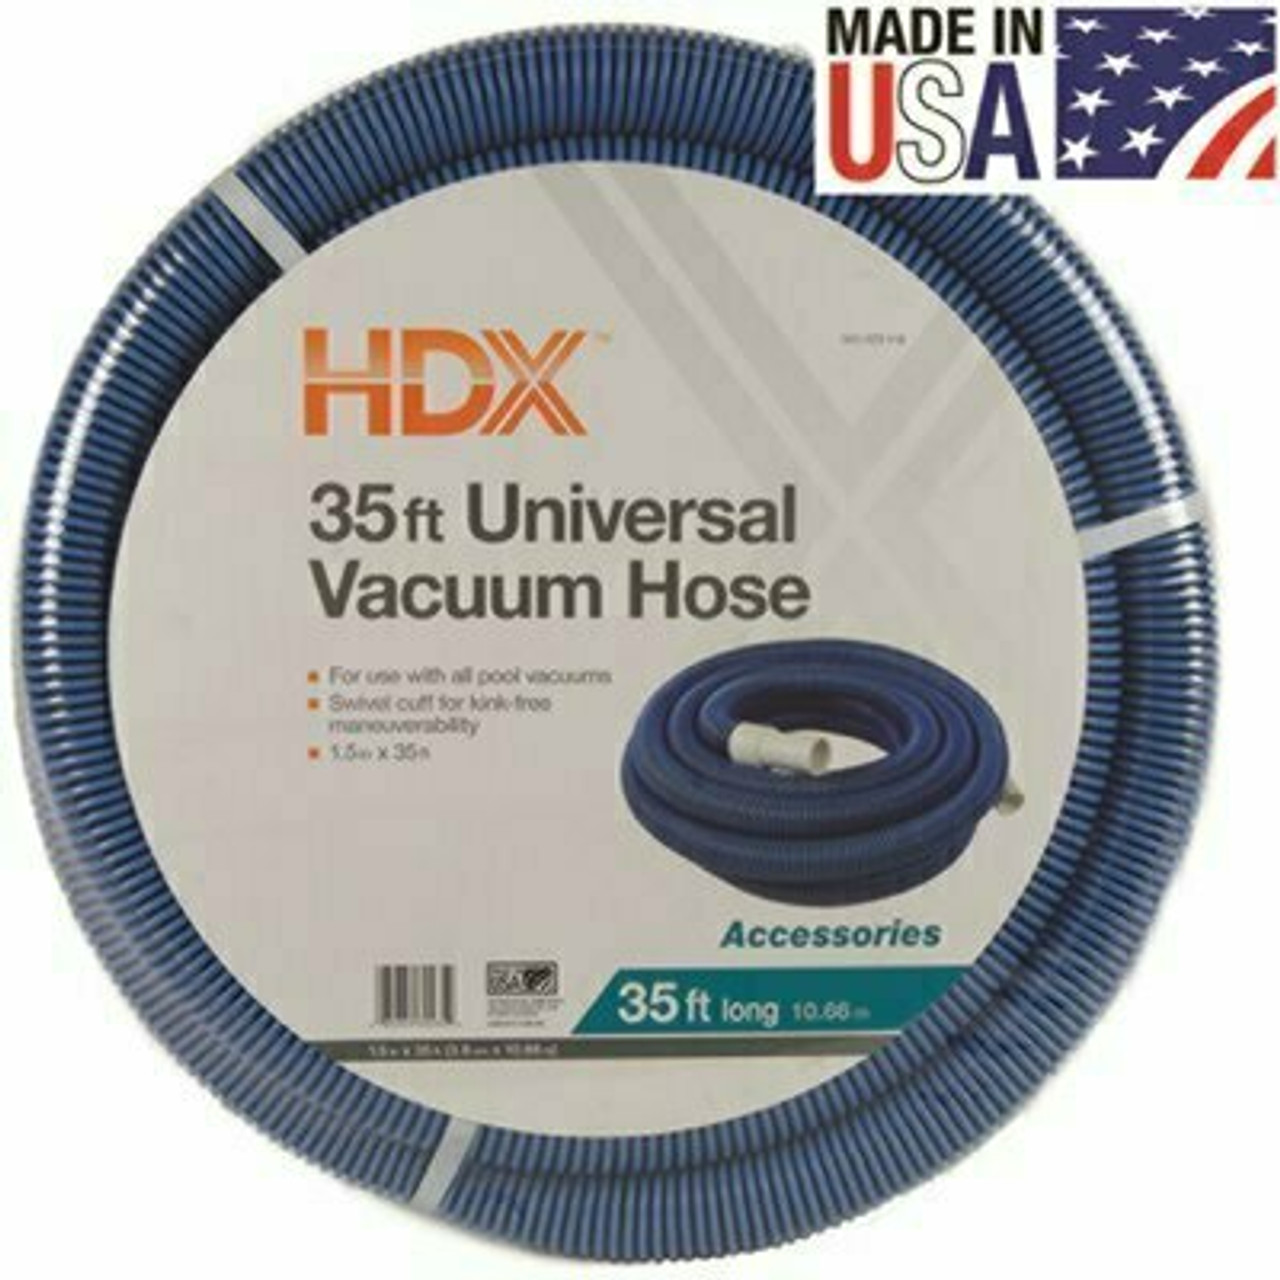 Hdx Spiral-Wound 35 Ft. X 1 1/2 In. Diameter Swimming Pool Vacuum Hose For In-Ground And Above-Ground Pools